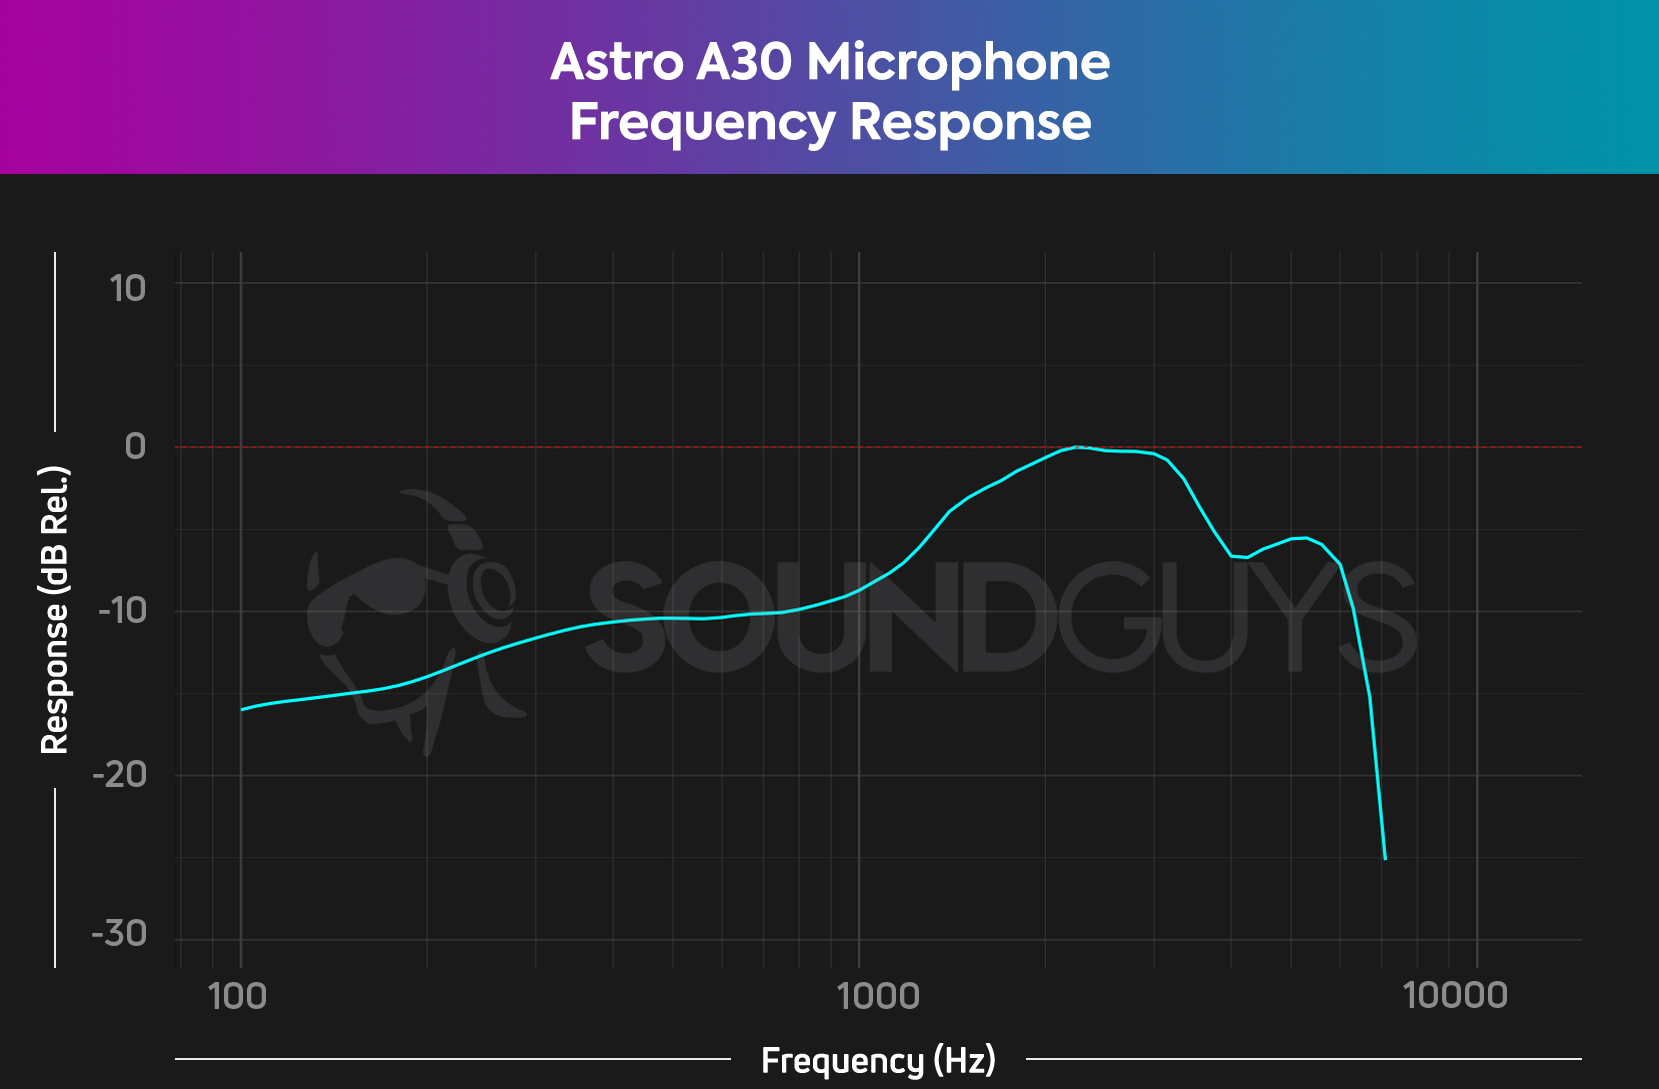 The microphone frequency response chart for the Astro A30.